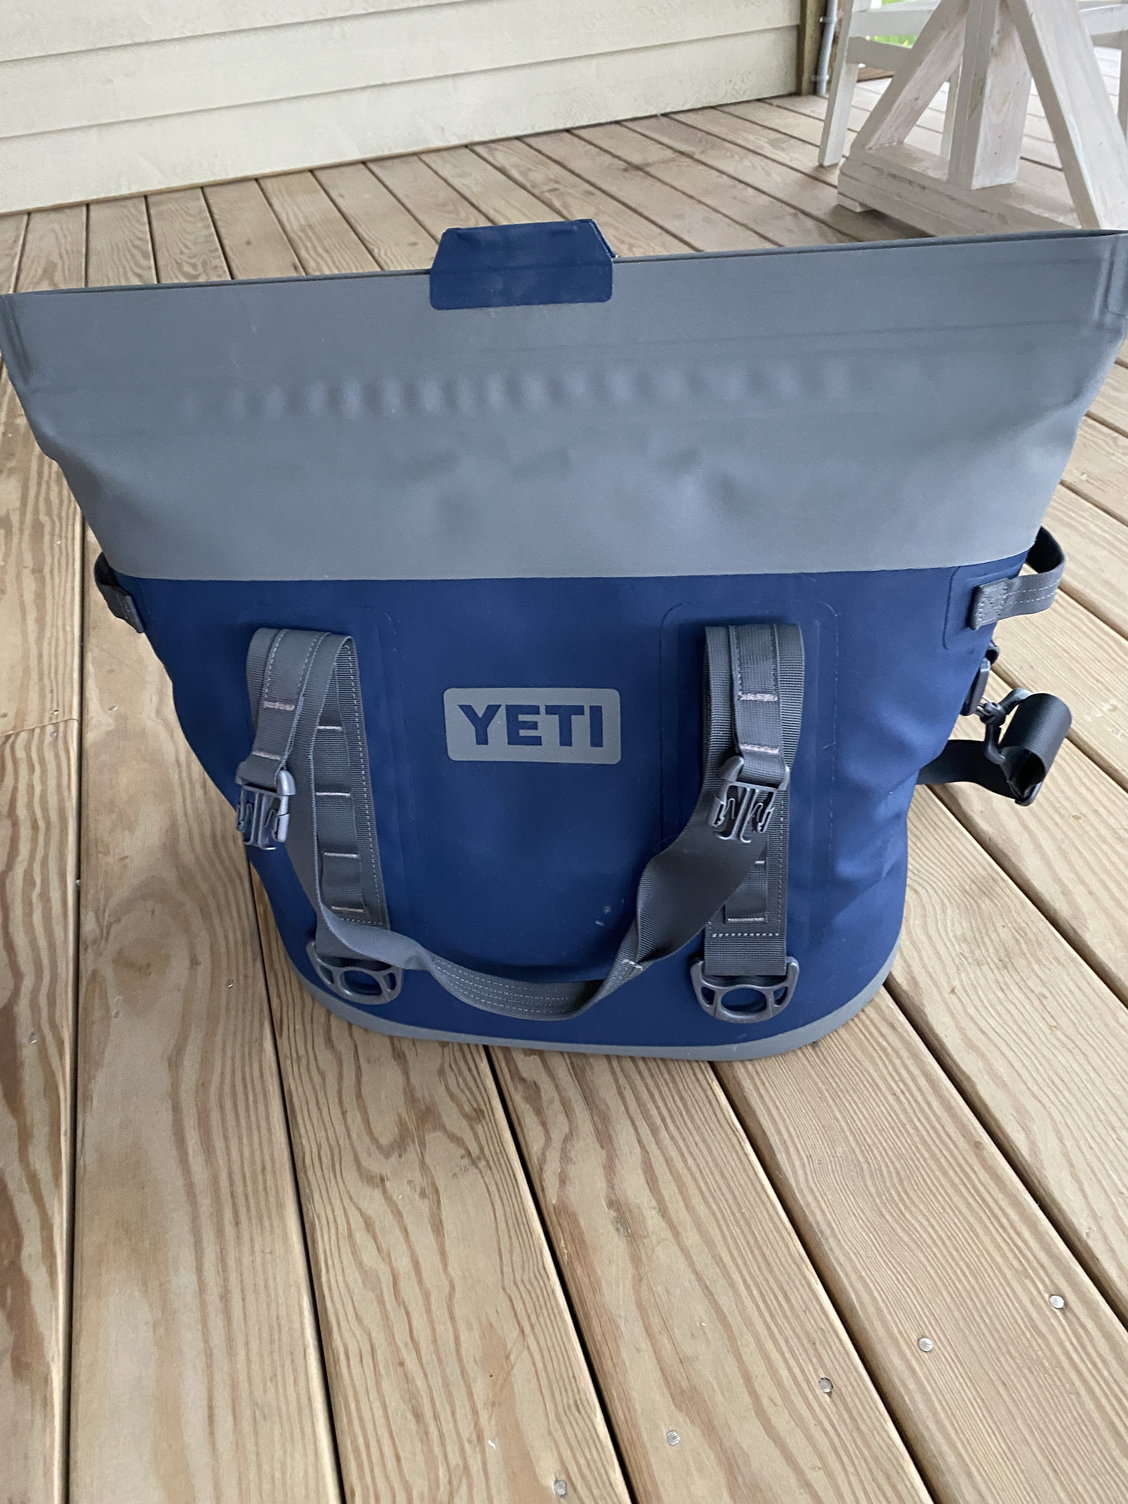 Yeti cooler - The Hull Truth - Boating and Fishing Forum